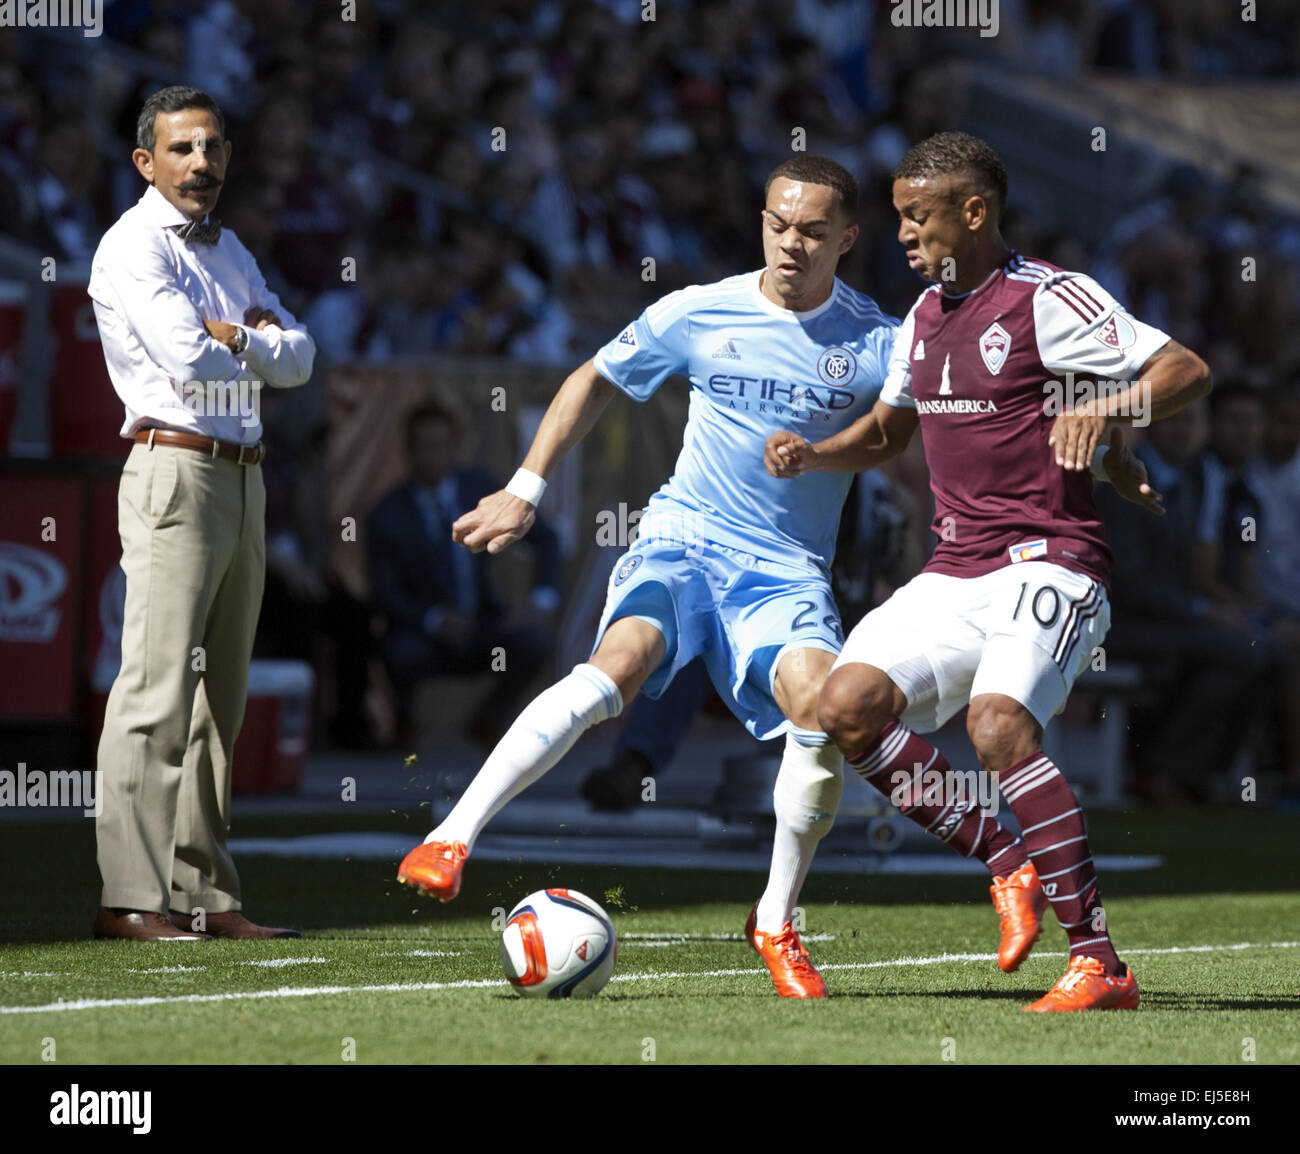 Commerce City, Colorado, USA. 21st Mar, 2015. NY D SHAY FACEY, left, battles for control of the ball with Rapids F GABRIEL TORRES, right, as Rapids Coach PABLO MASTOENI, far left, watches on during the 1st. Half at Dicks Sporting Goods Park during the Rapids Home Opener Saturday afternoon. Rapids & New York City FC draw to 0-0. © Hector Acevedo/ZUMA Wire/Alamy Live News Stock Photo